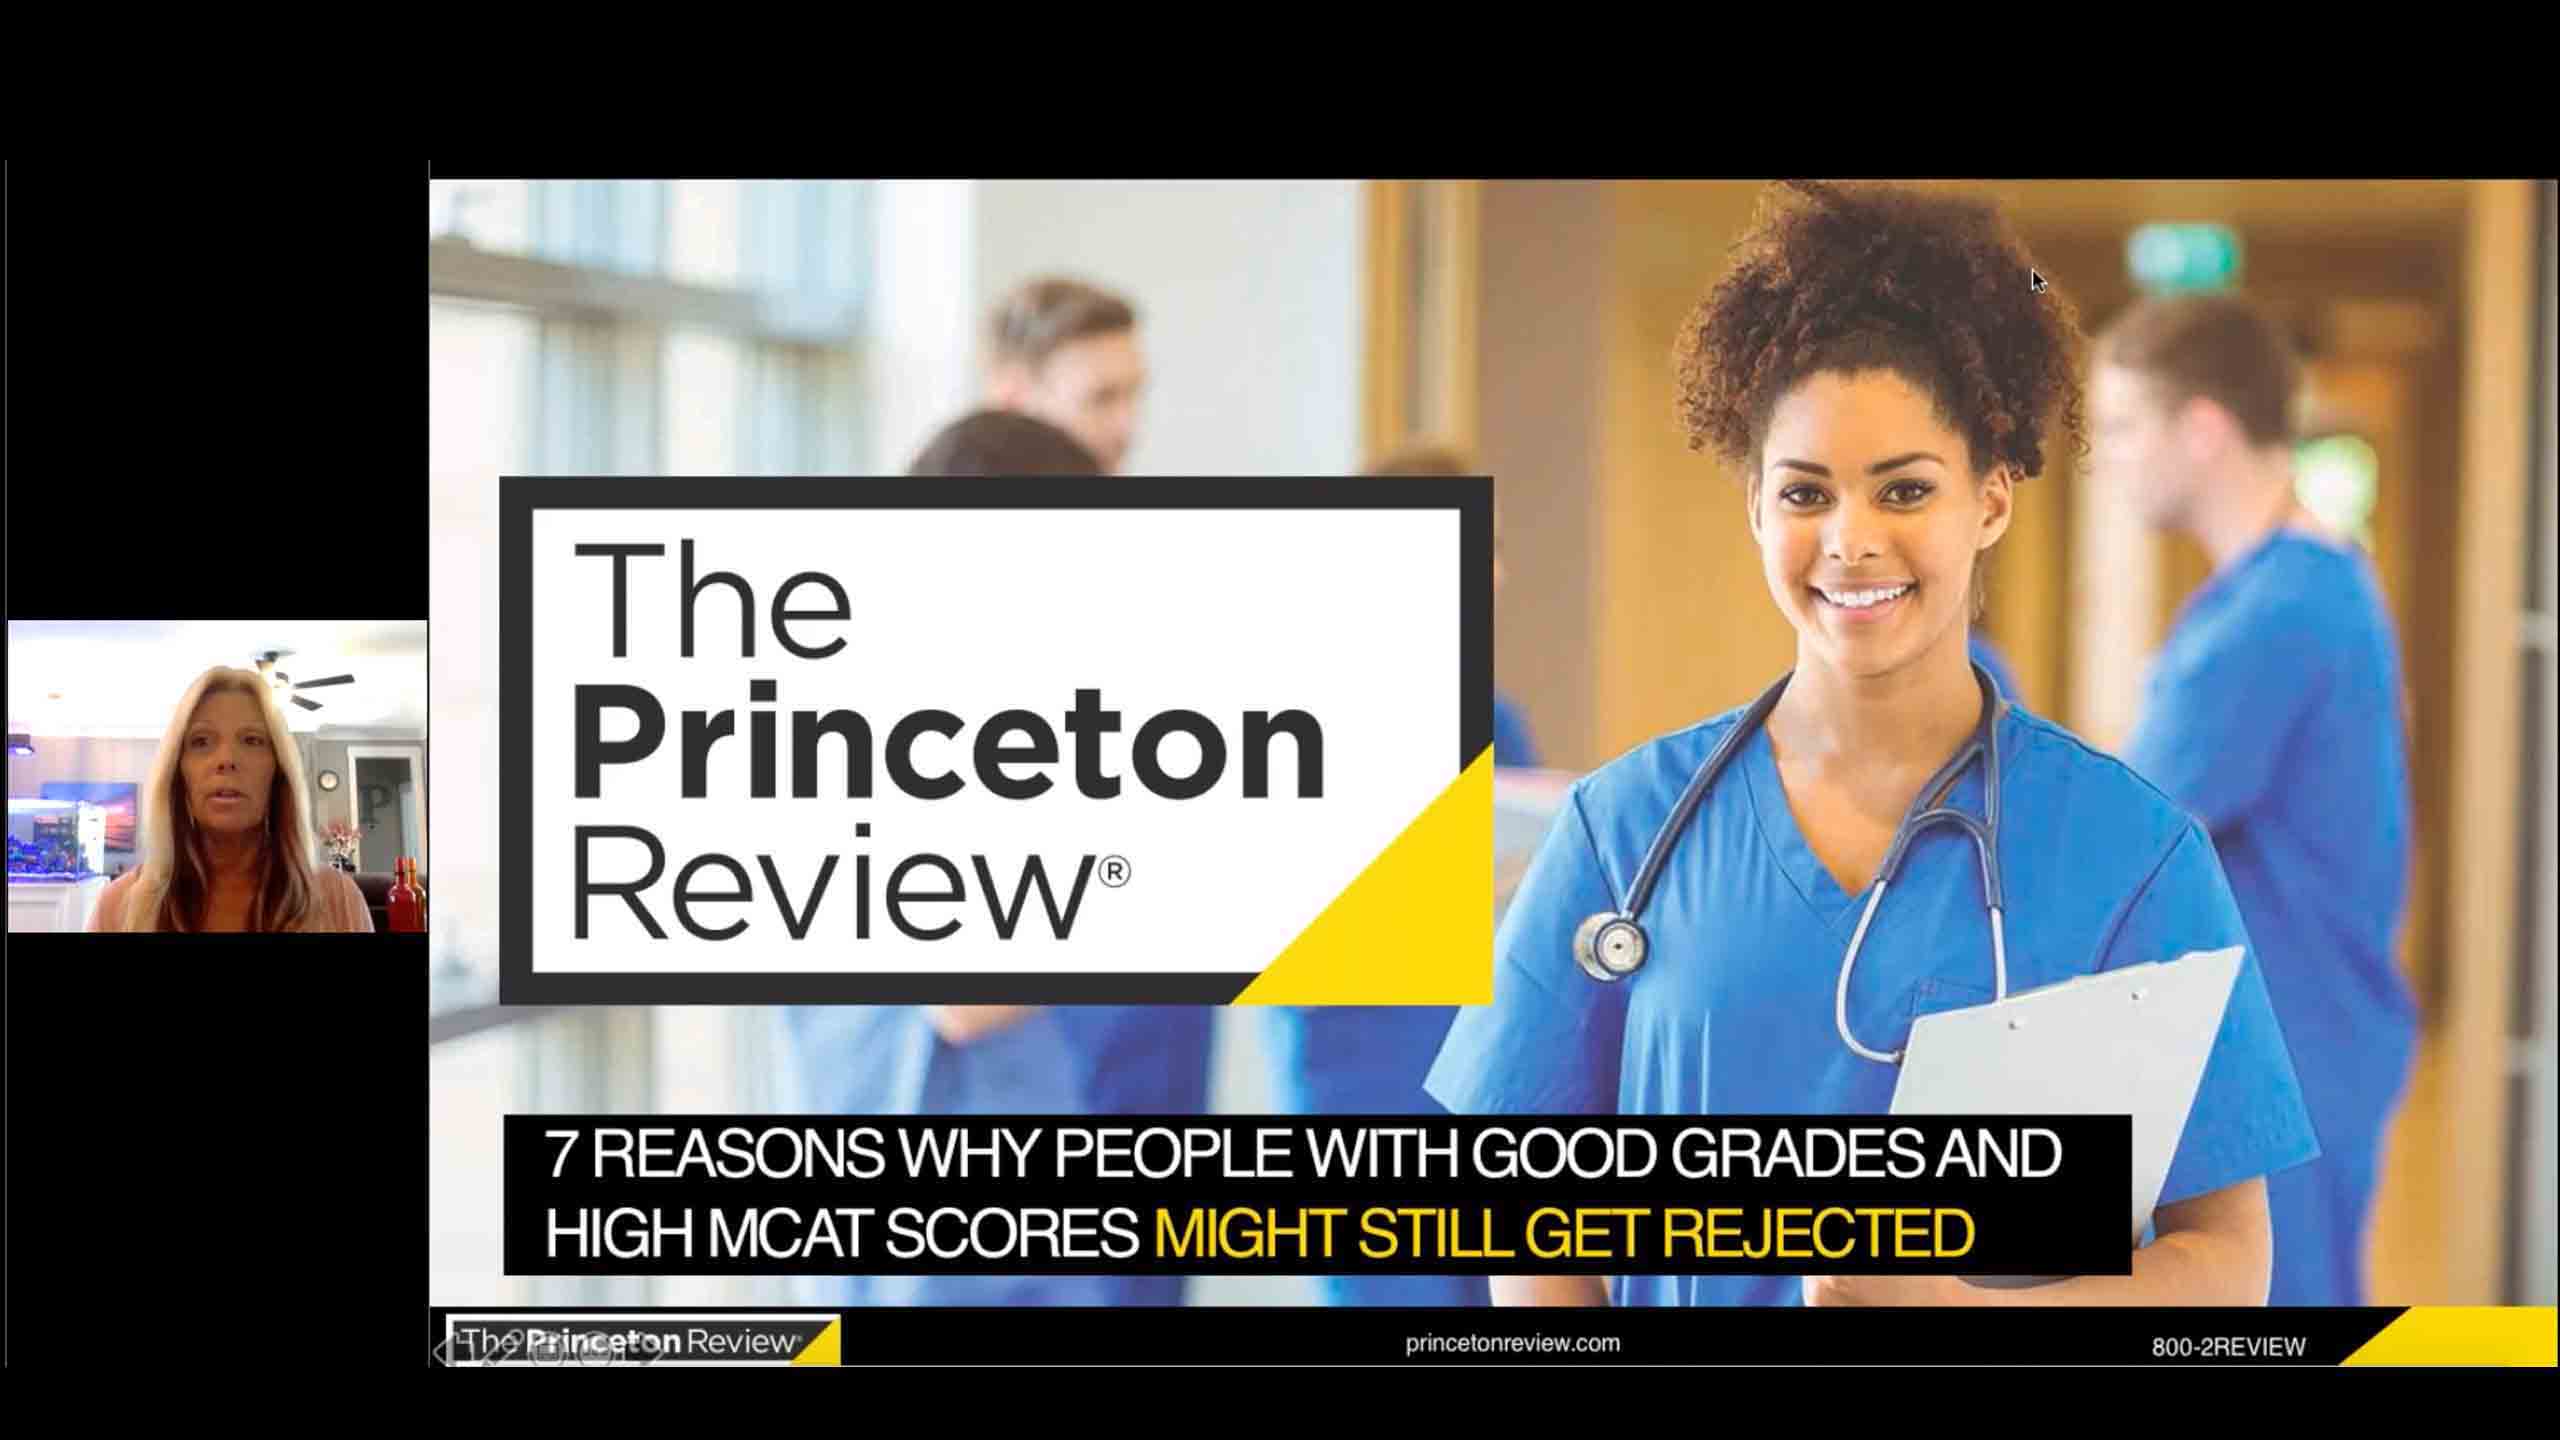 7 Reasons why kids with good grades and MCAT scores get denied